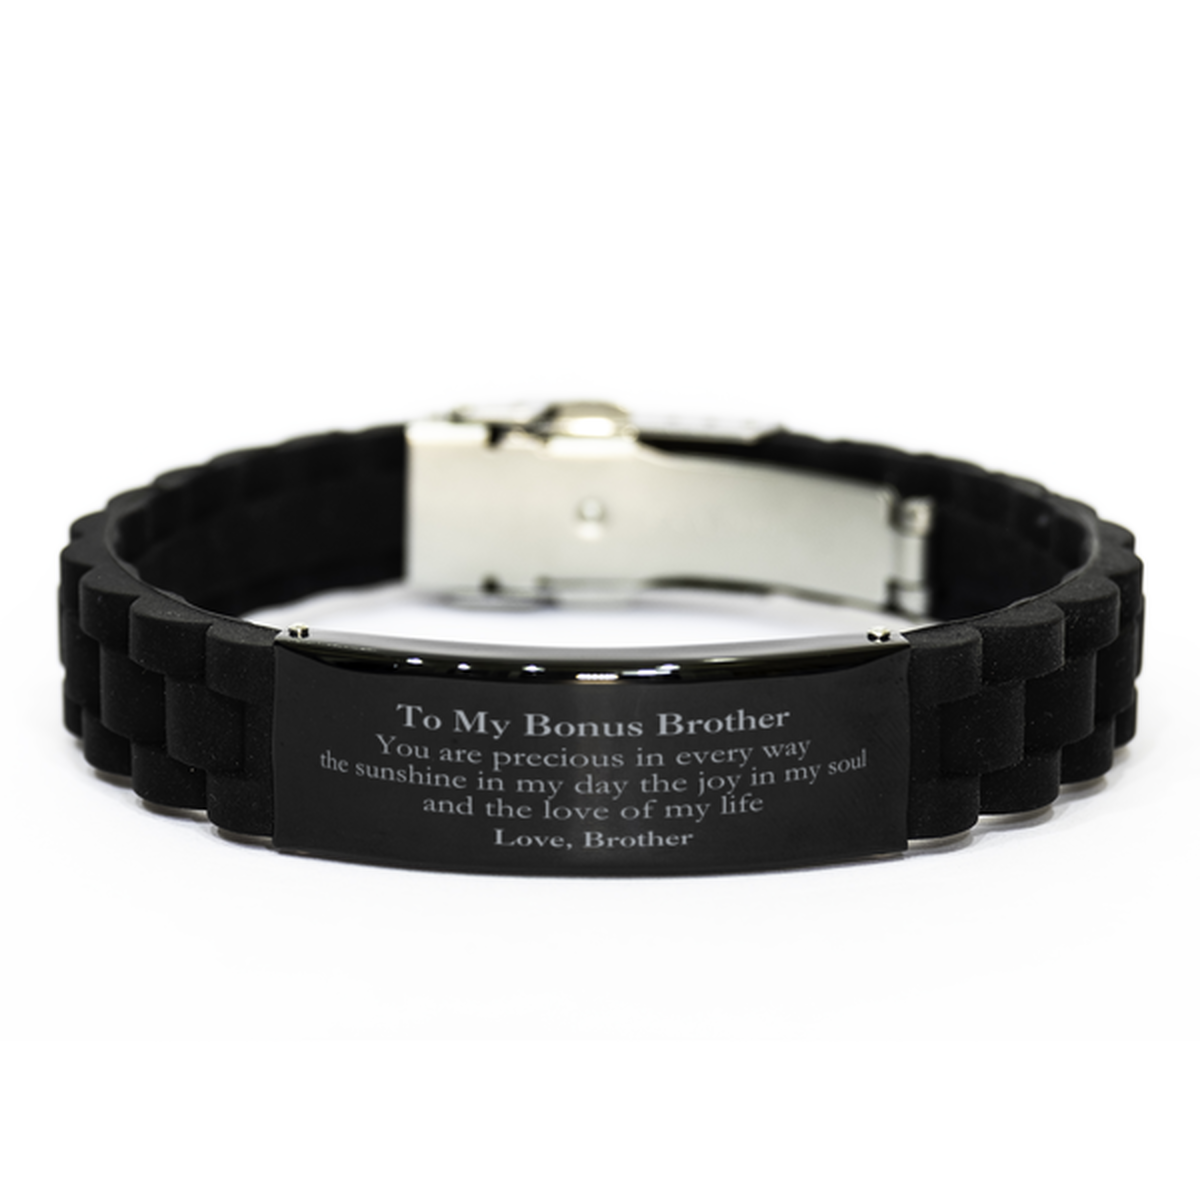 Graduation Gifts for Bonus Brother Black Glidelock Clasp Bracelet Present from Brother, Christmas Bonus Brother Birthday Gifts Bonus Brother You are precious in every way the sunshine in my day. Love, Brother